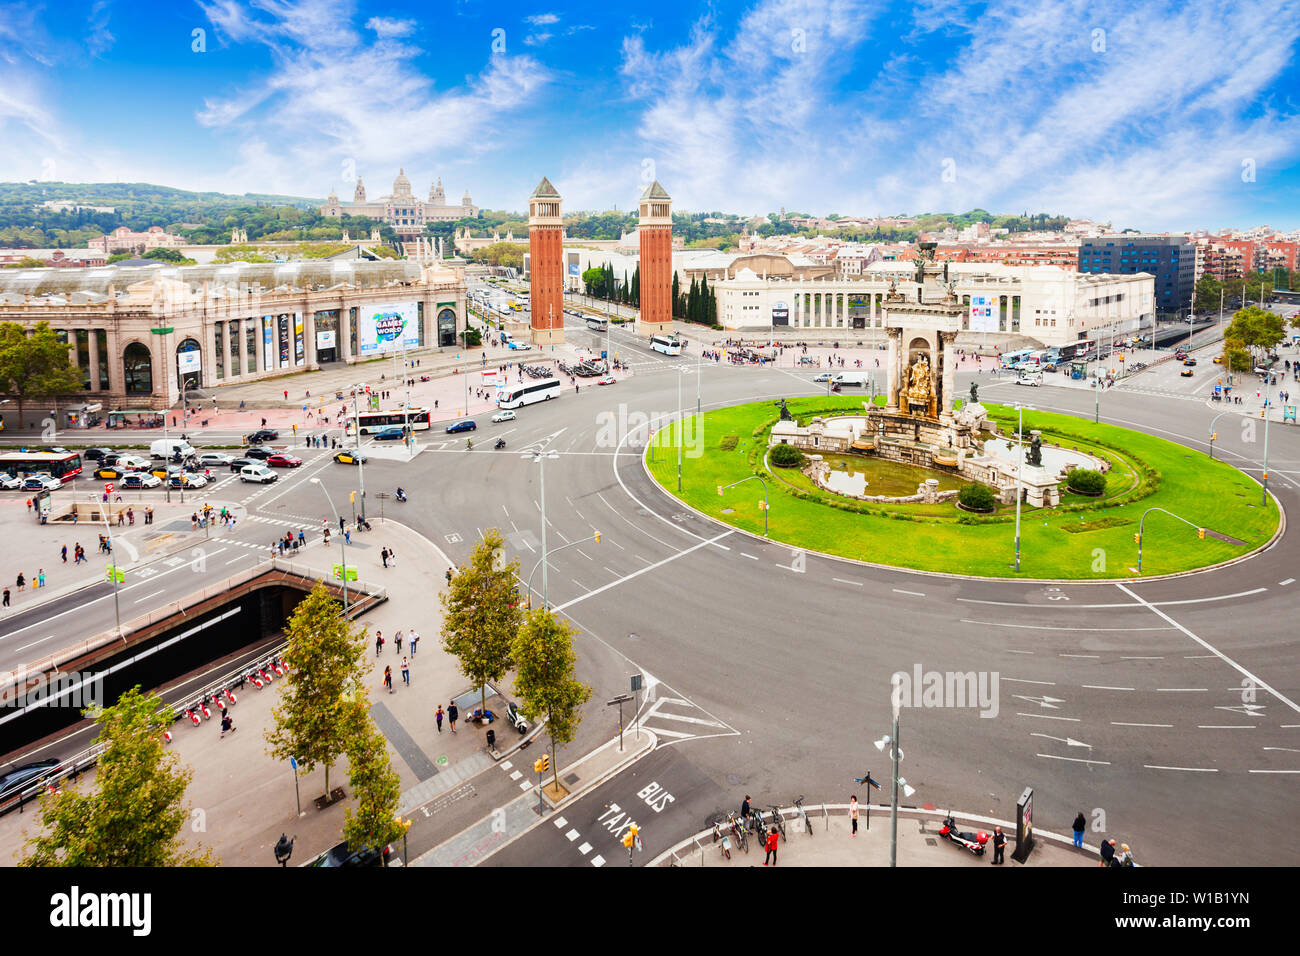 Placa Espanya or Plaza de Espana is one of the most important squares in Barcelona city in Catalonia region of Spain Stock Photo